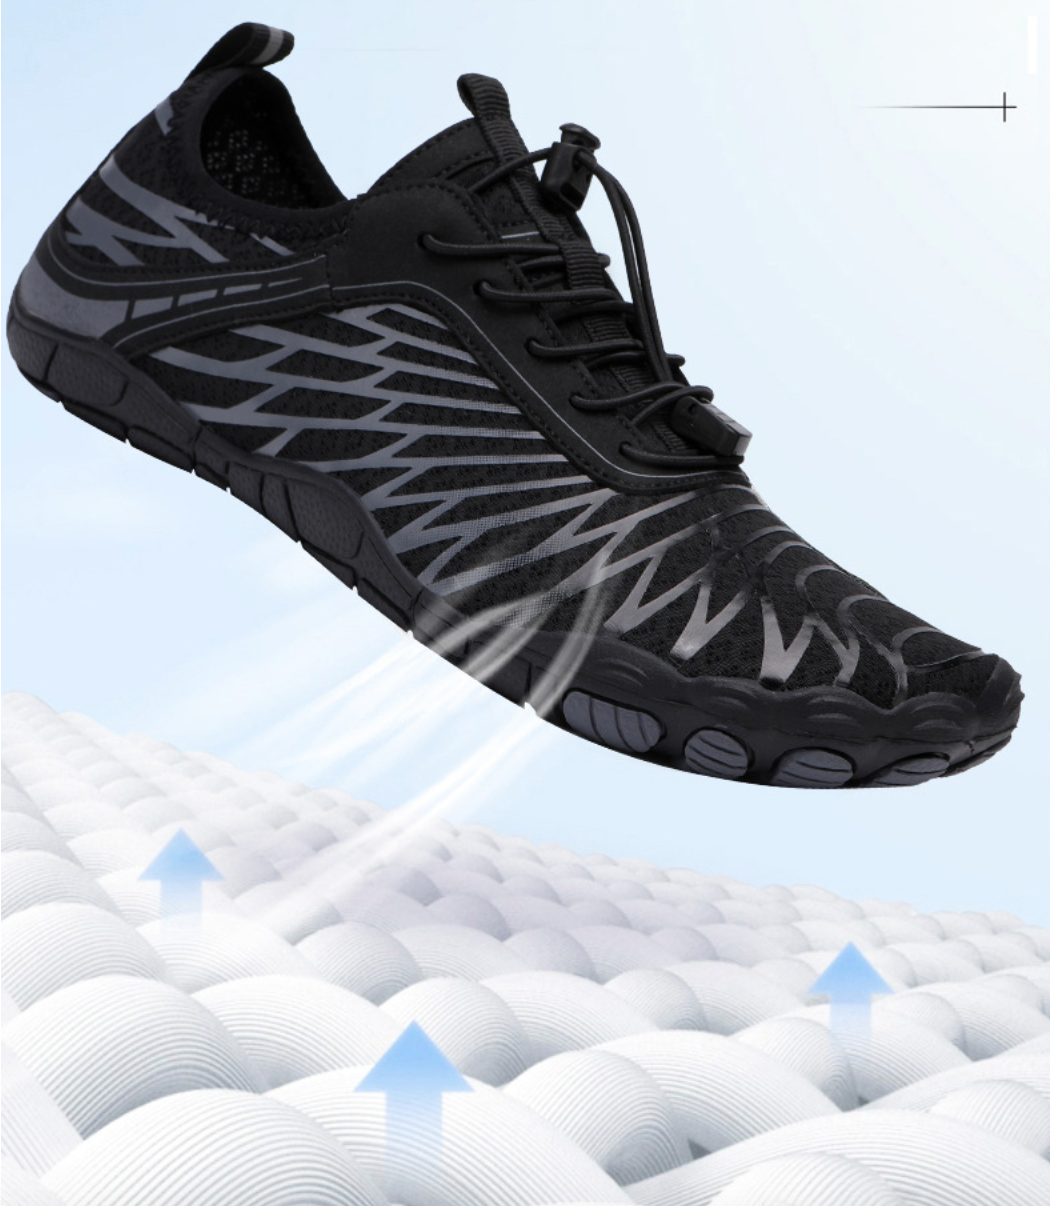 Orthorelief Barefoot Shoes